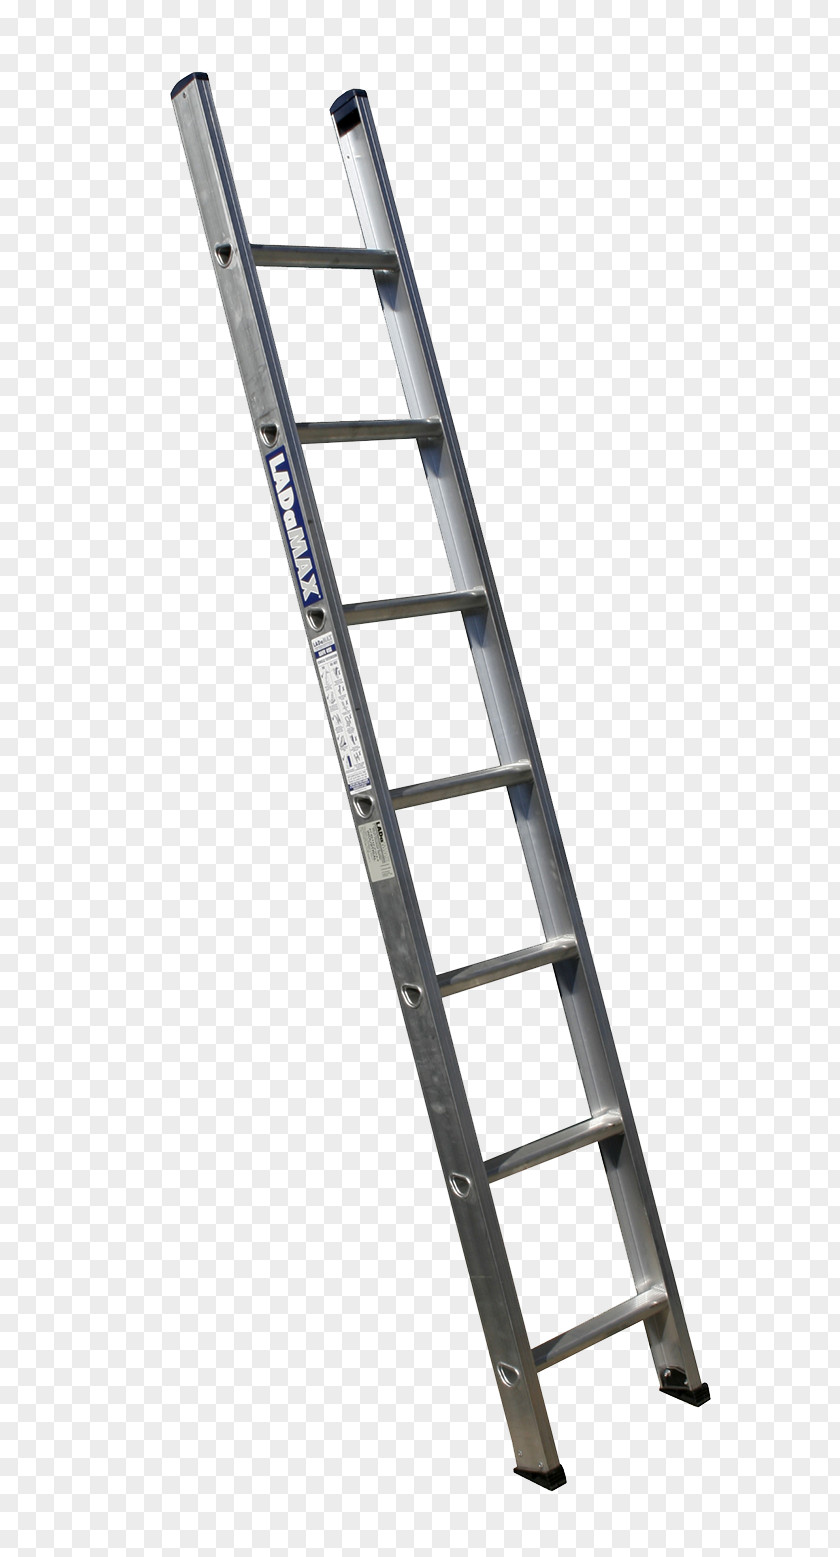 Ladder GOODWILL ENGINEERING COMPANY Aluminium Ladders Export Industry PNG